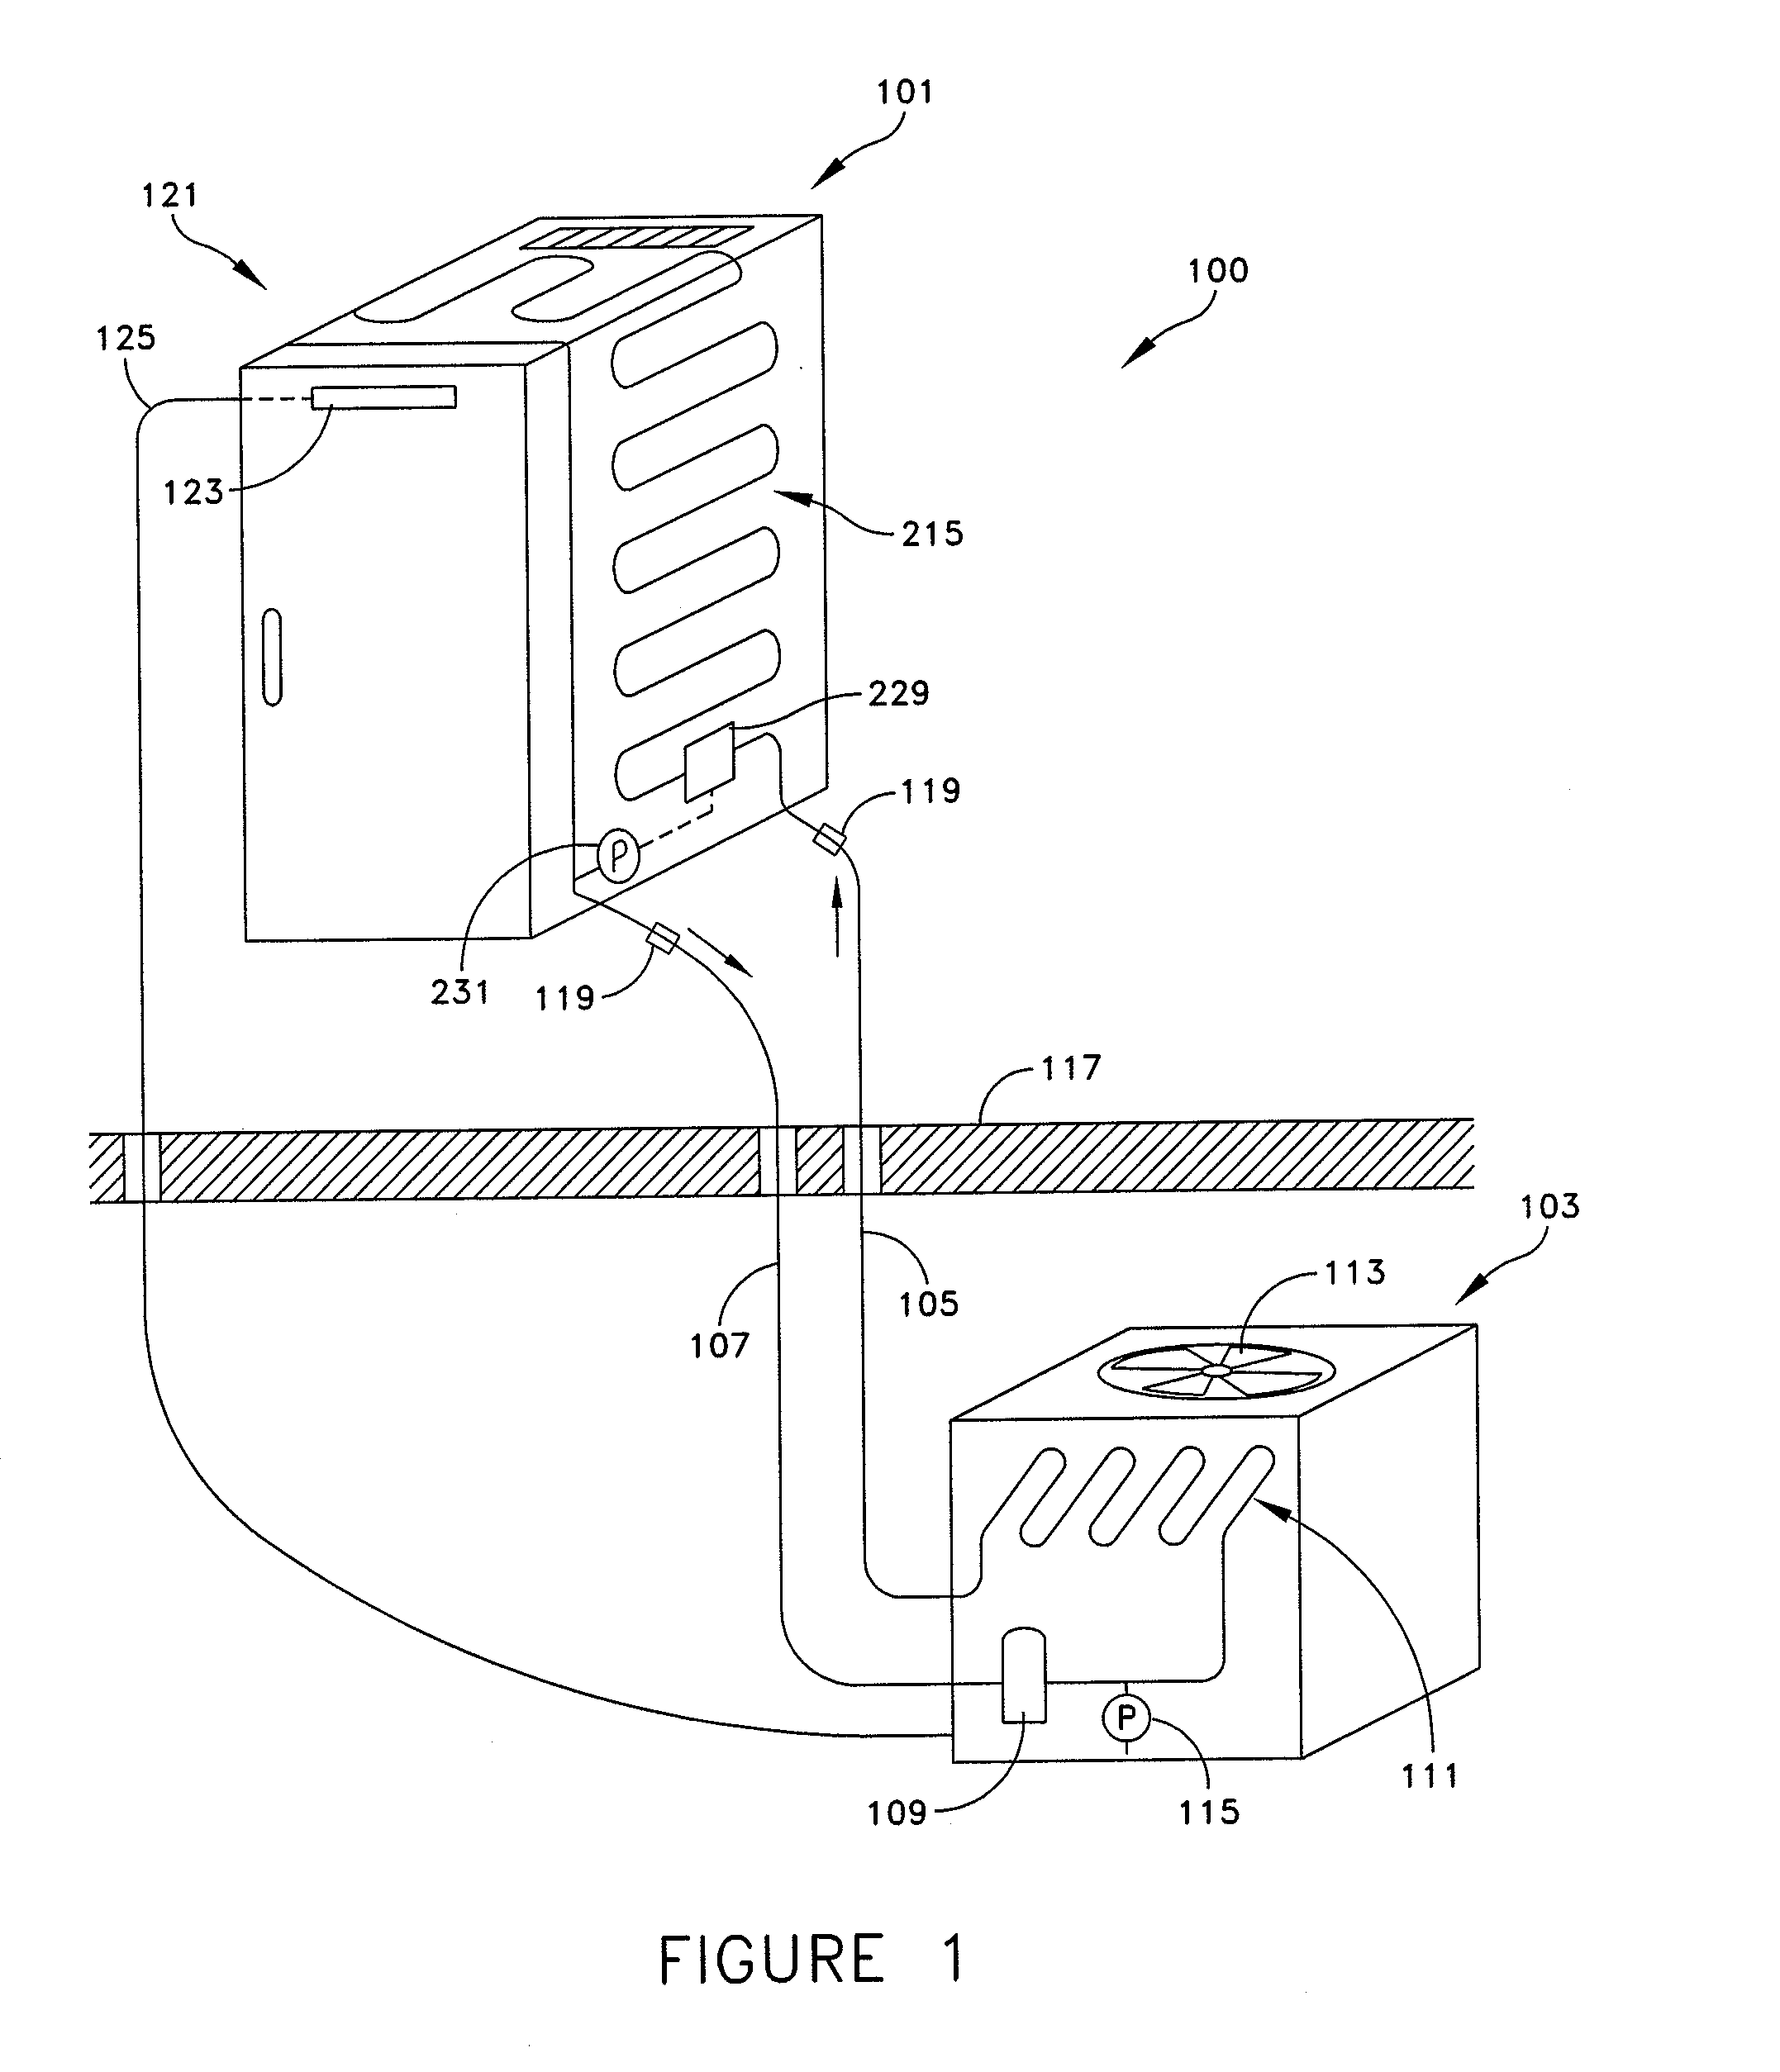 A/v cooling system and method